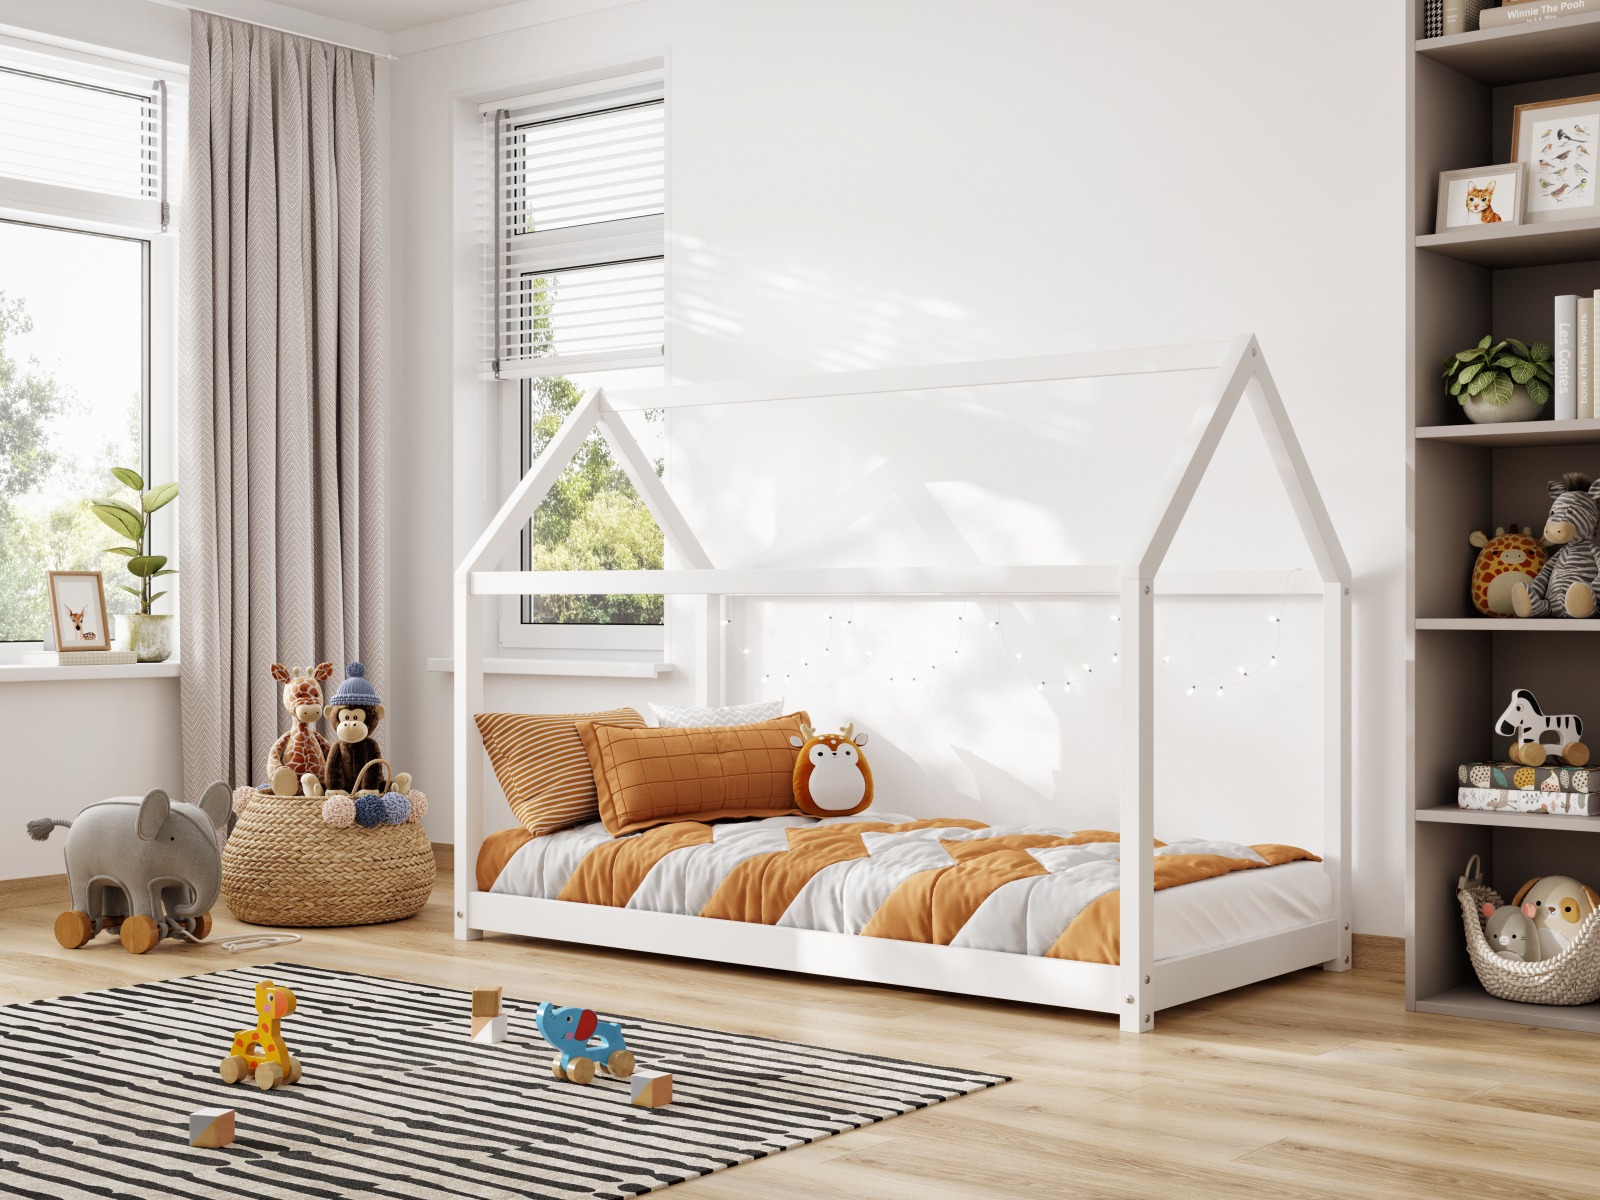 Flair Play House Wooden Bed Frame White